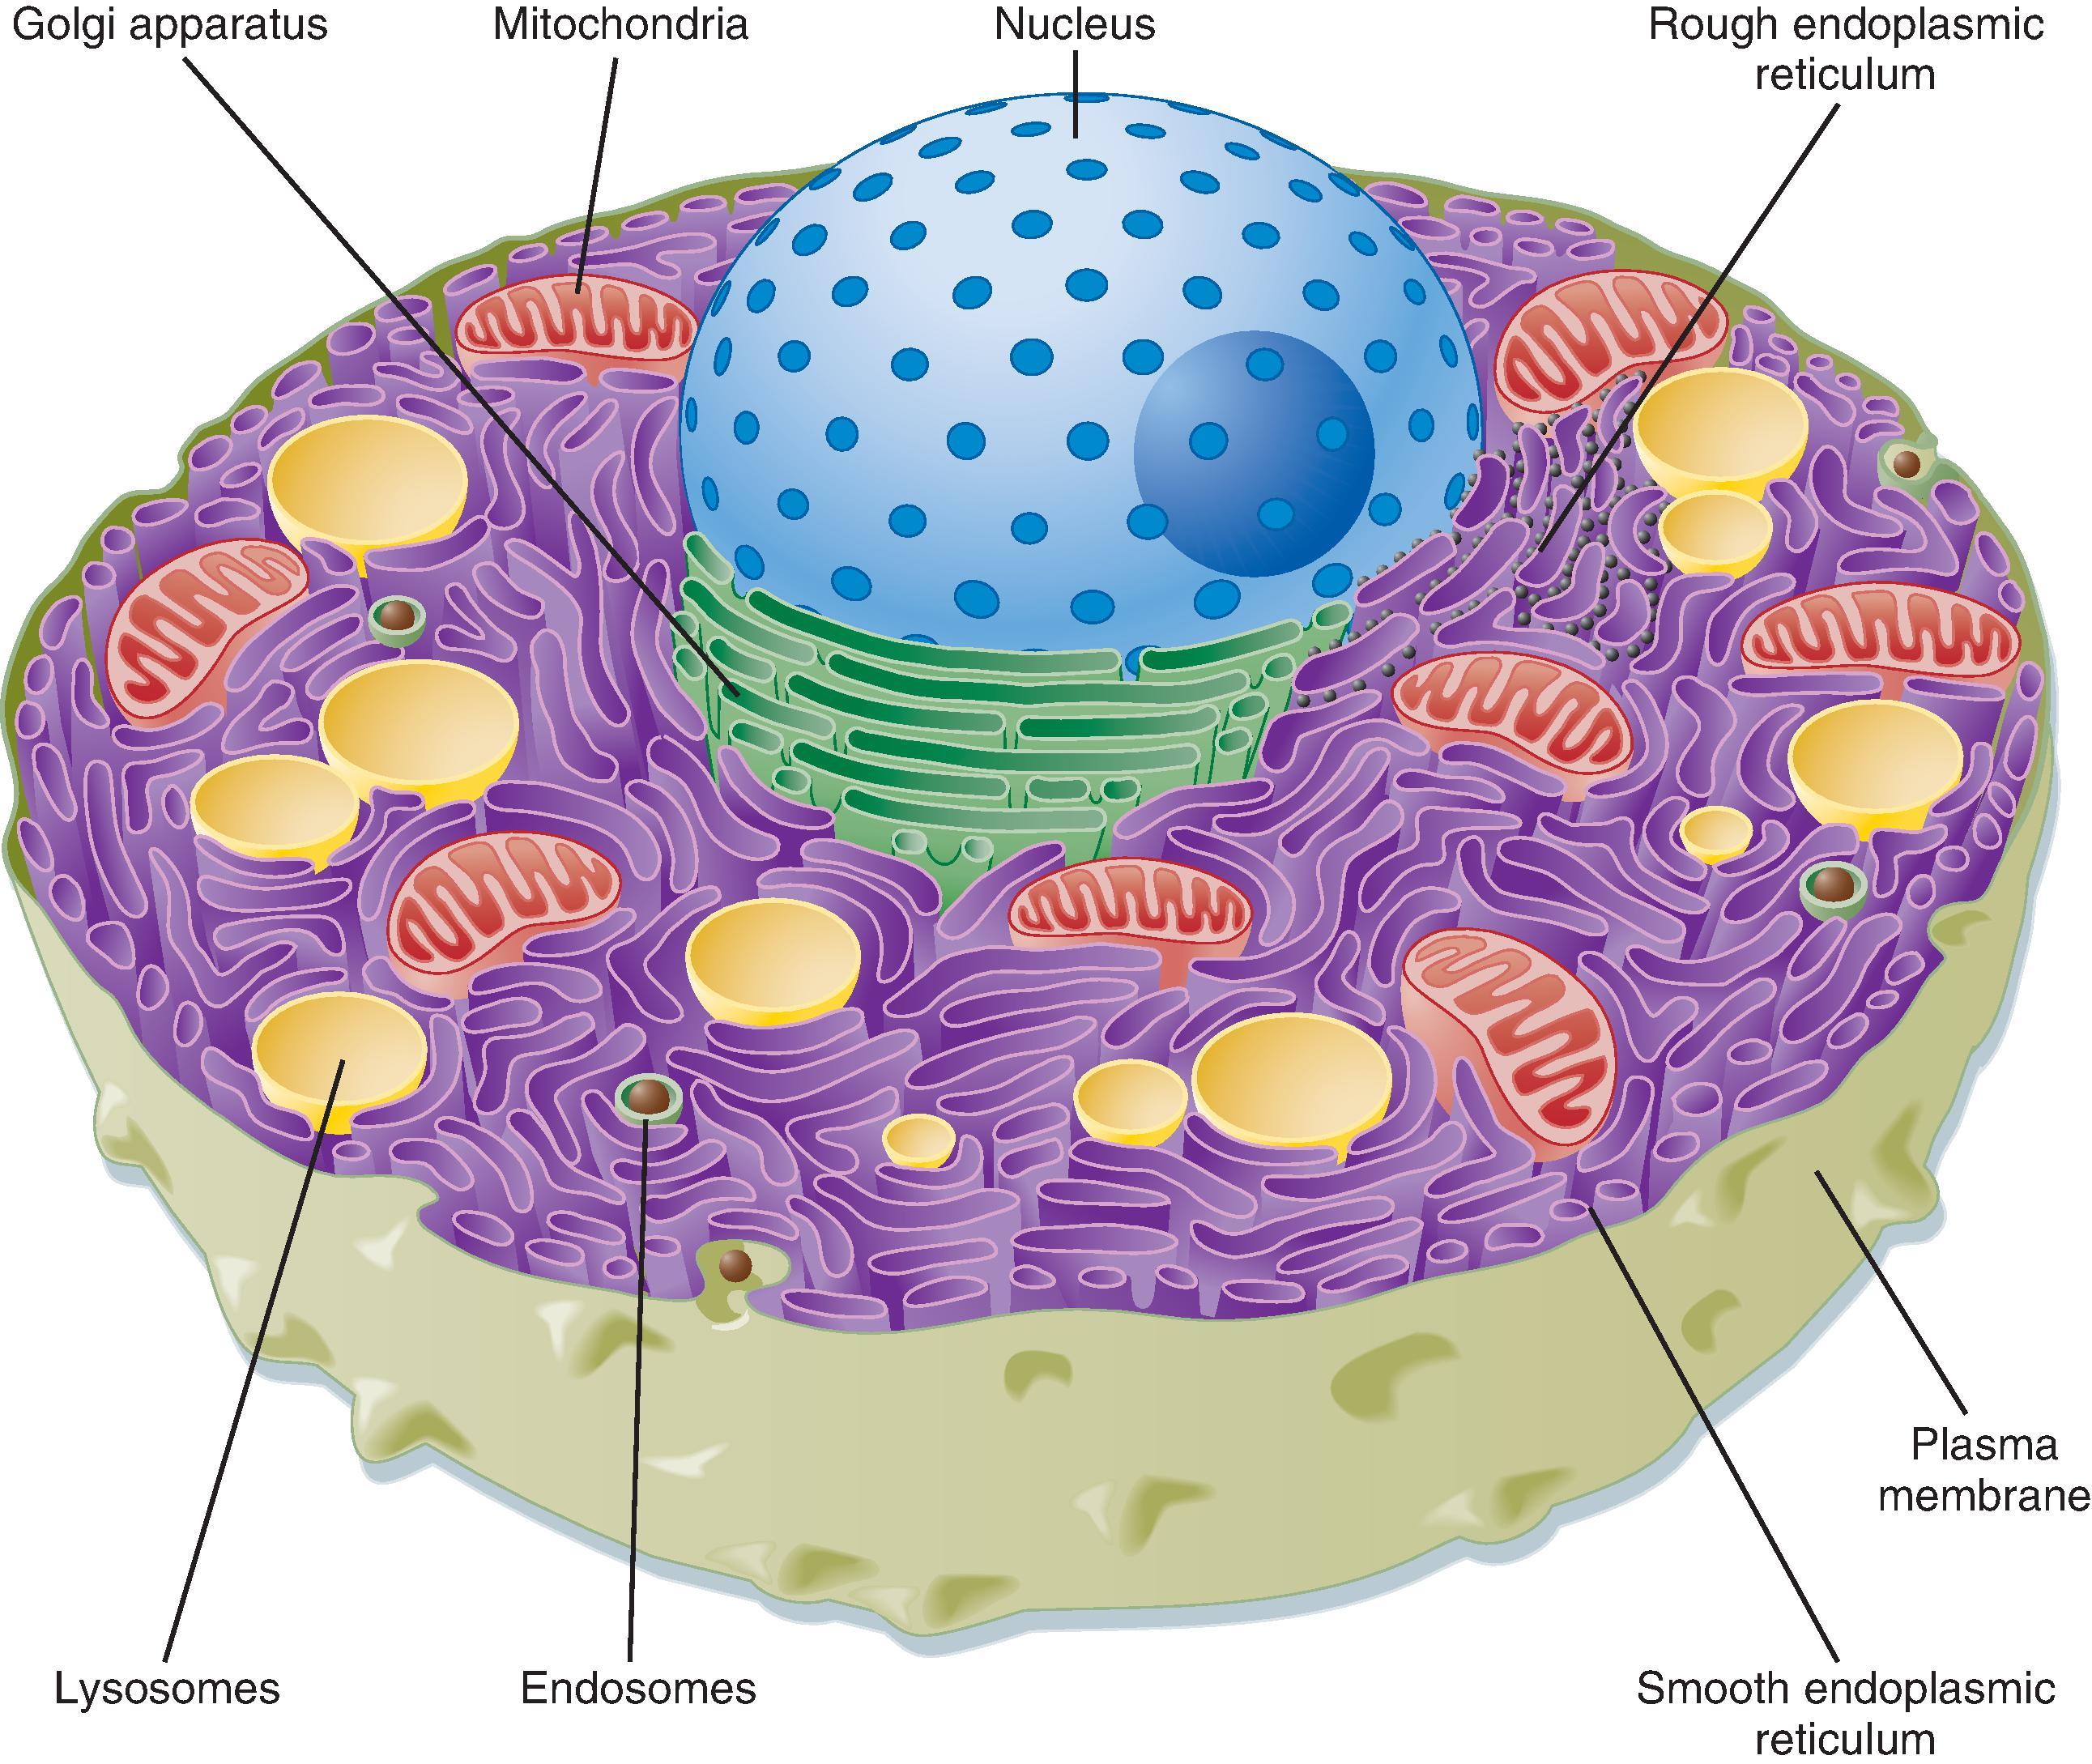 Fig. 1.1, Schematic drawing of a eukaryotic cell. The top portion of the cell is omitted to illustrate the nucleus and various intracellular organelles. See text for details.